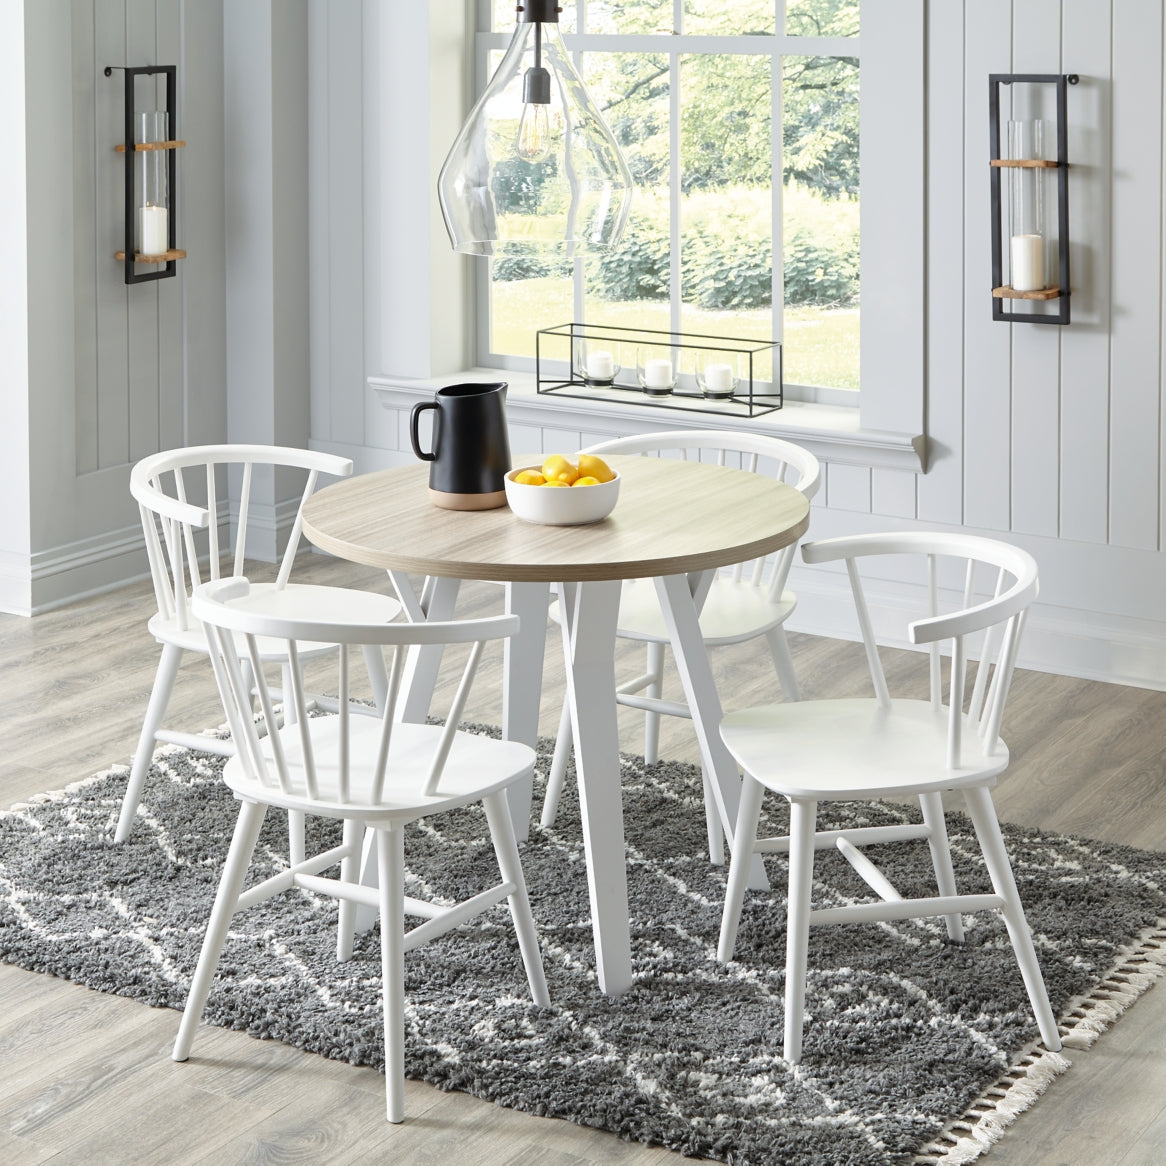 Grannen Dining Table and 4 Chairs - PKG010479 - furniture place usa